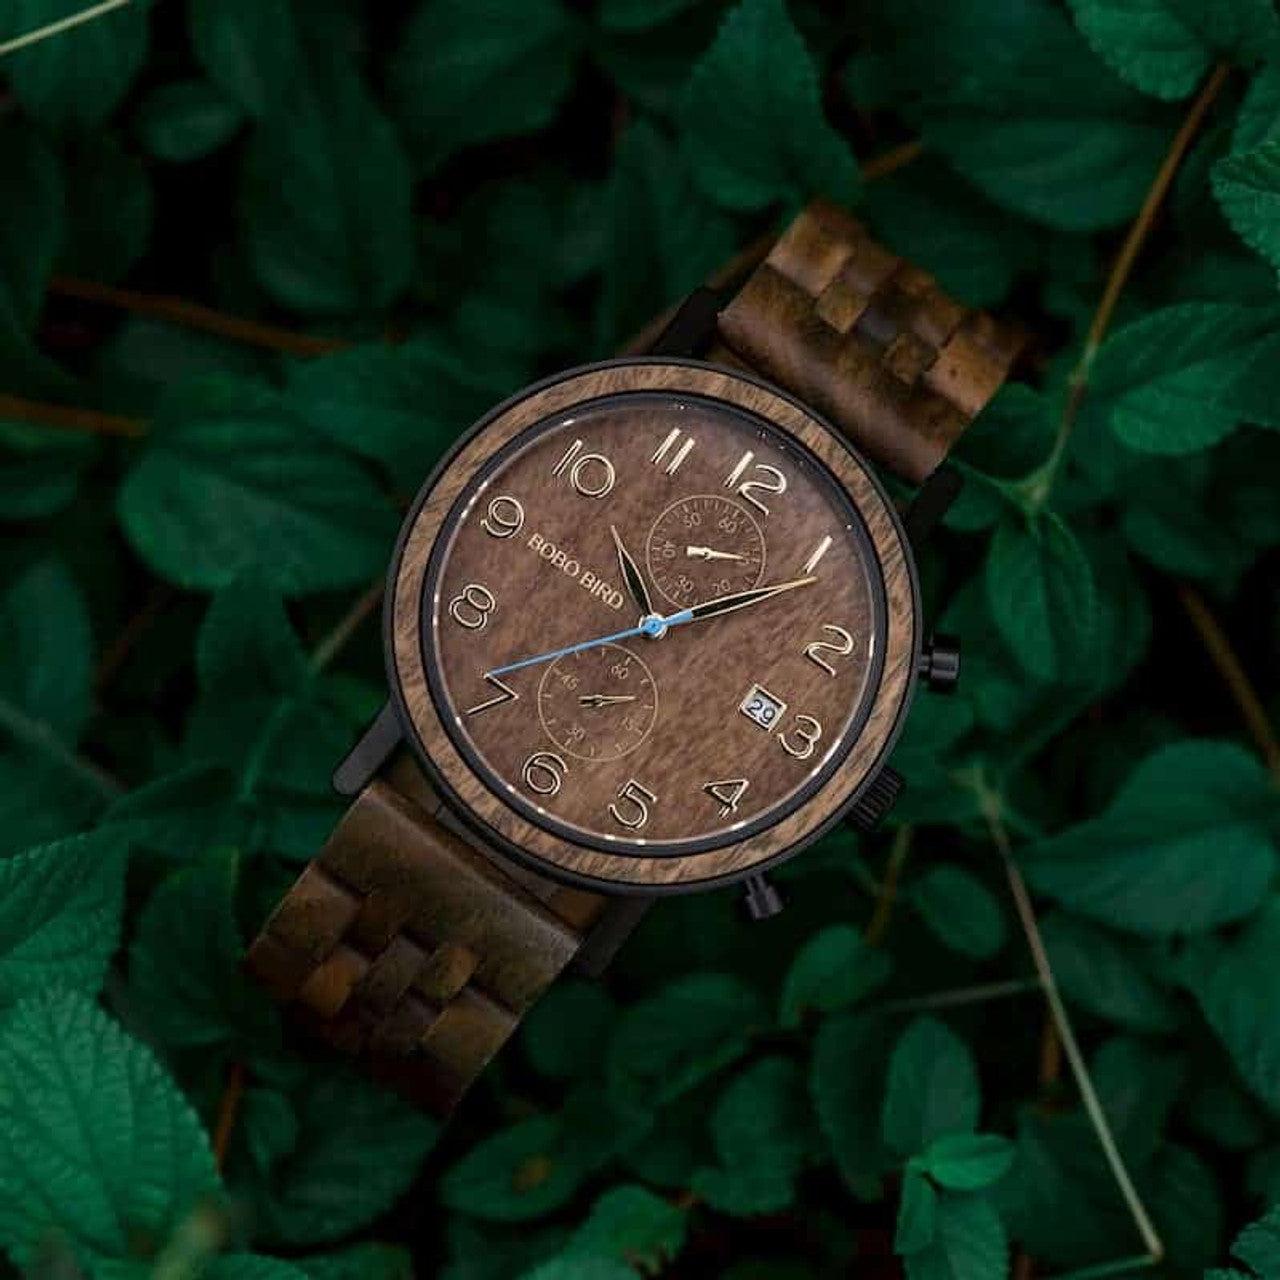 OTTO Wood Watch - Men’s Classic Handmade Maple Wooden Watch Natural Wooden Dial with Date Display Chronograph Watches - Socrates S08-3